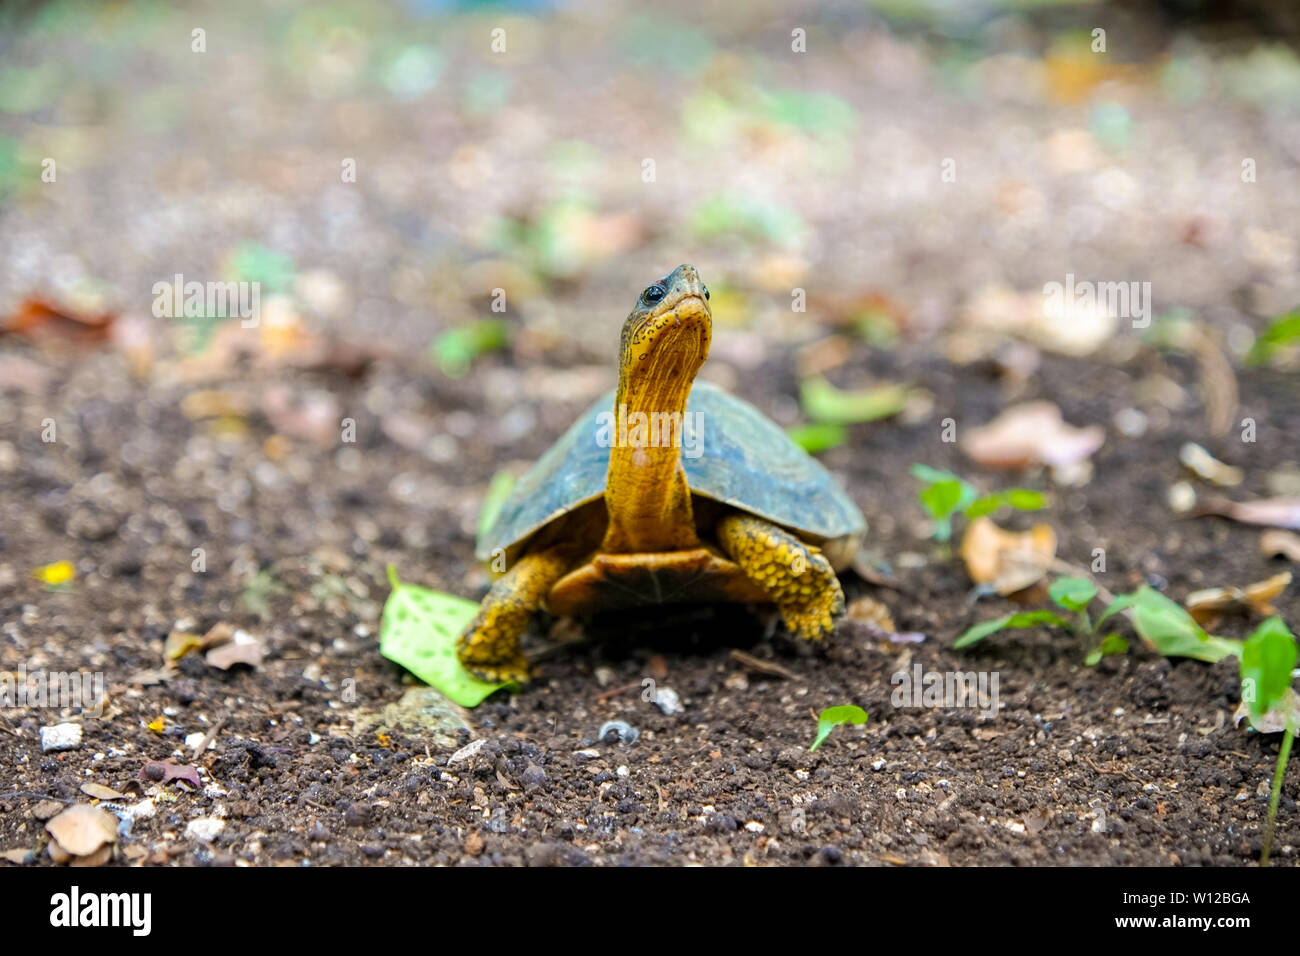 Cute Turtle Looking Up in Cozumel Mexico. Stock Photo